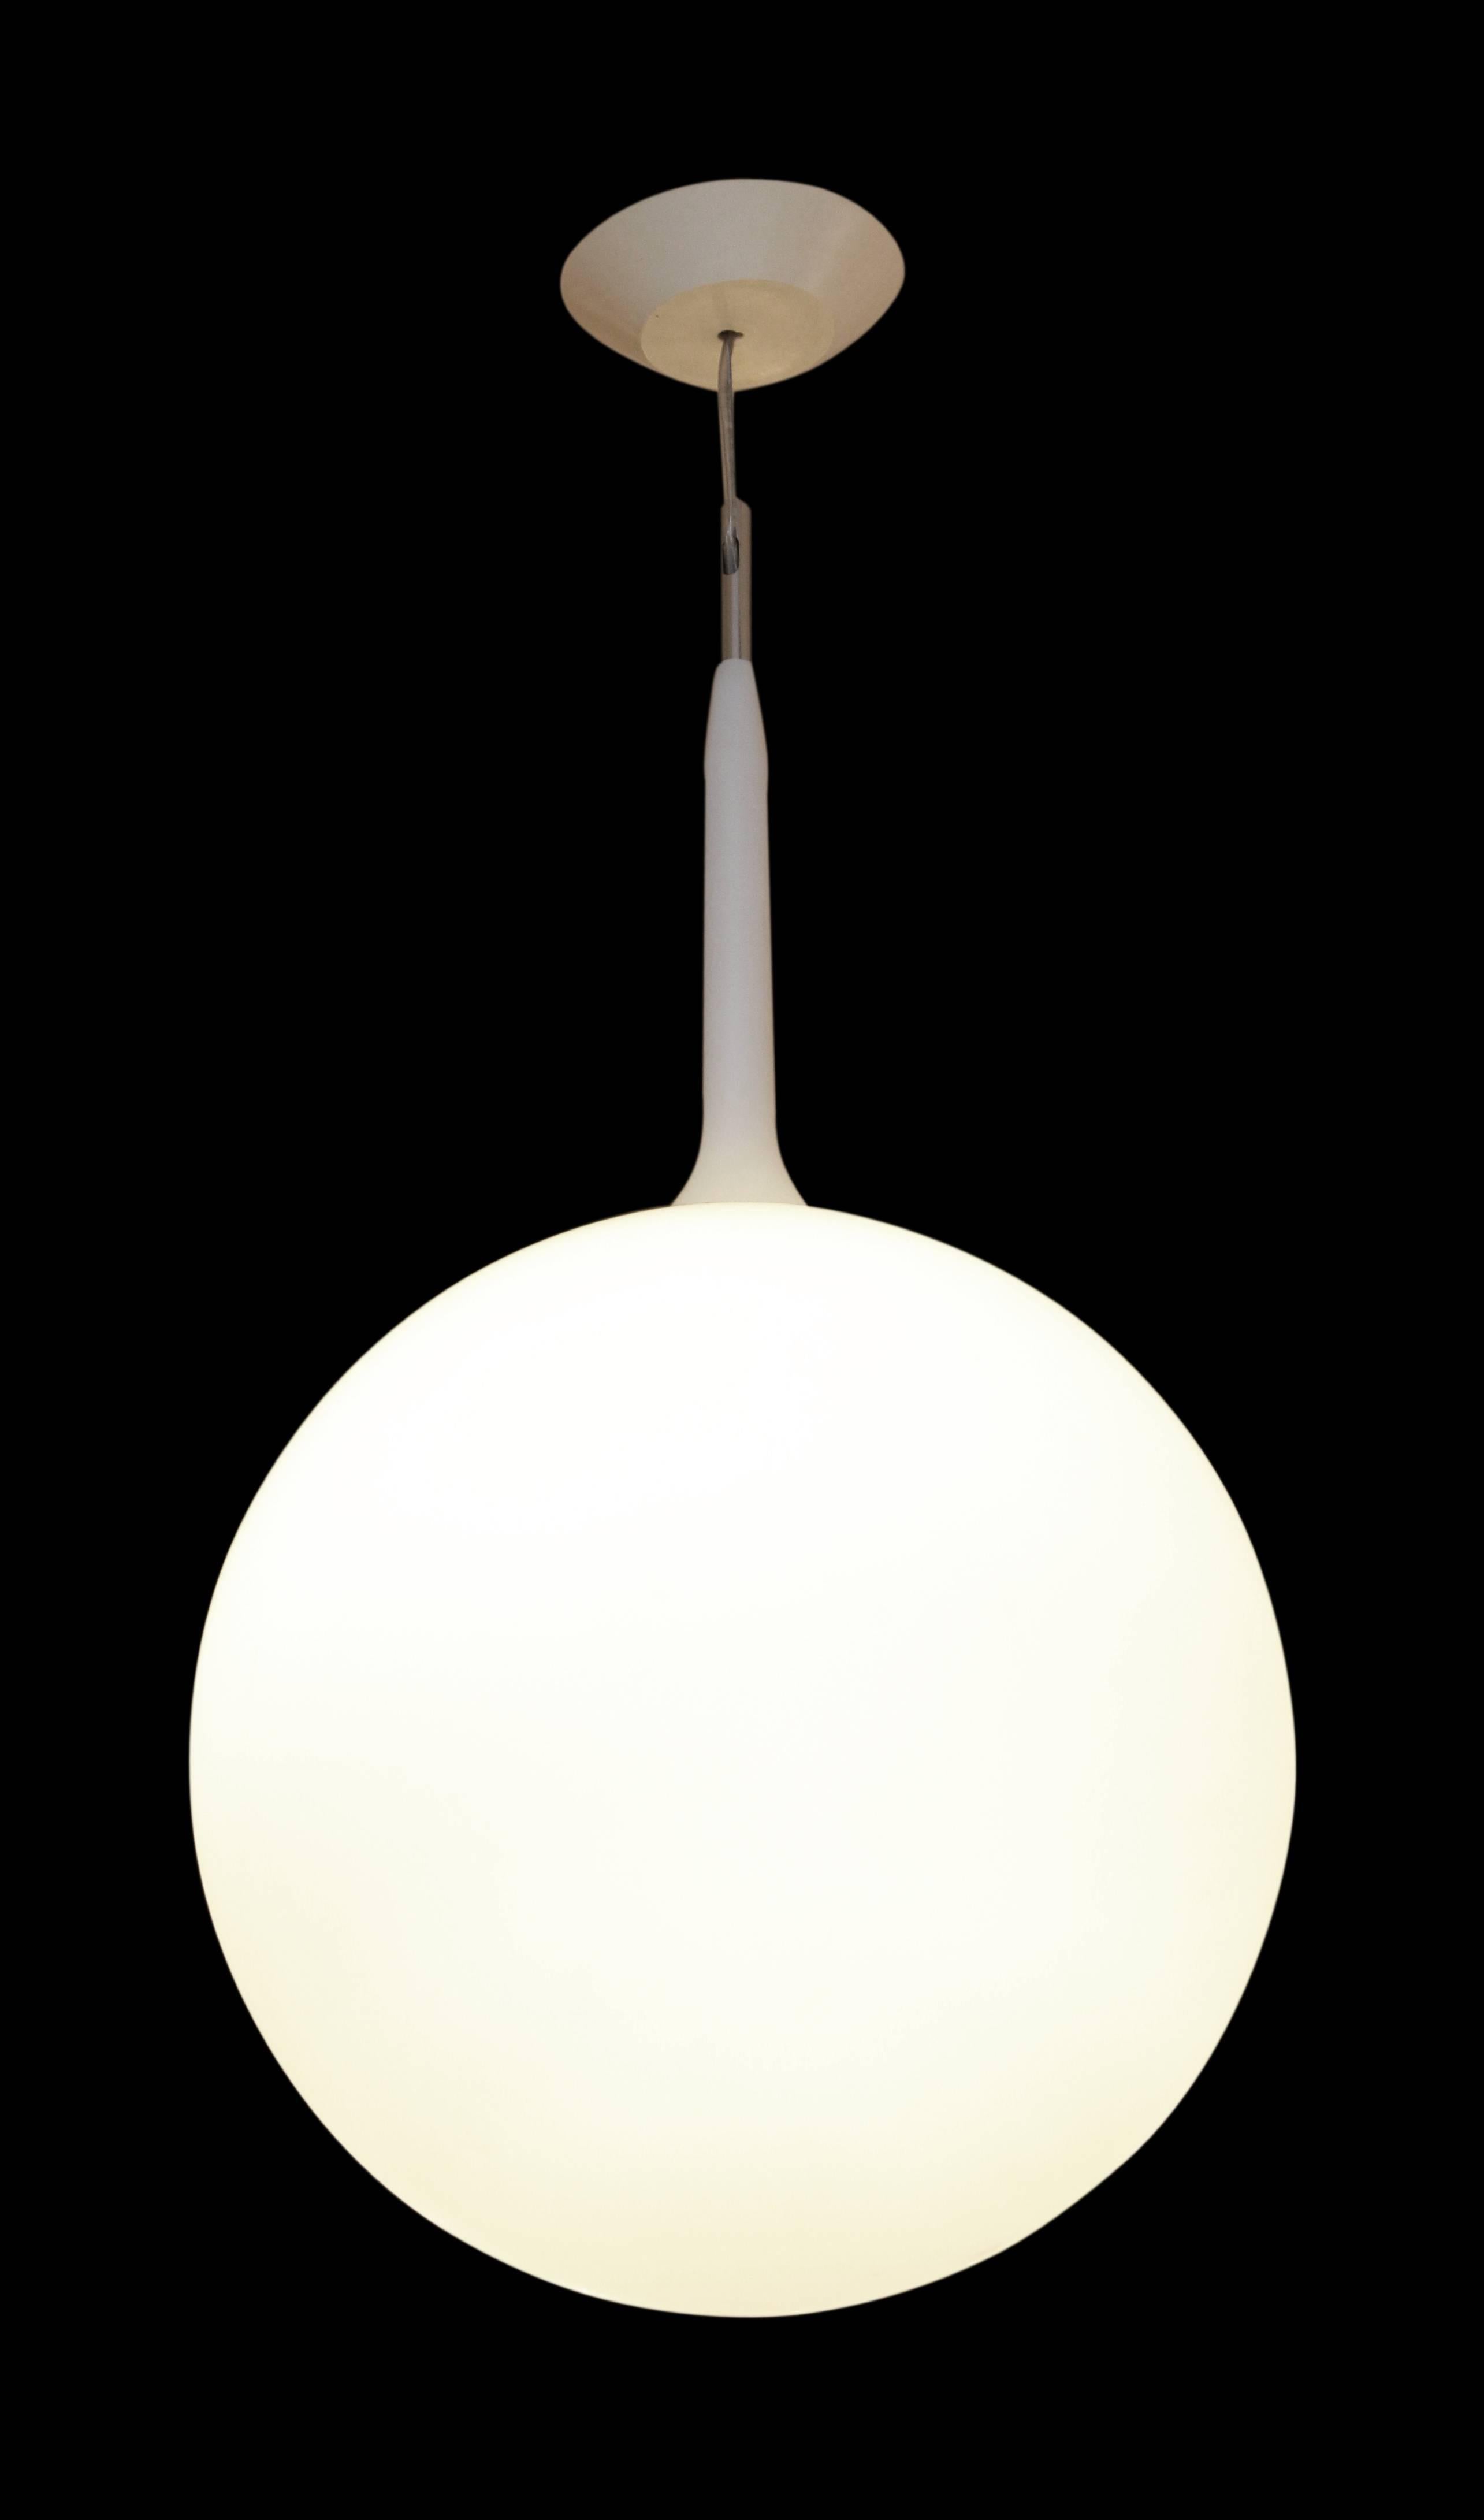 2004 Italian Mid-Century Modern white globe pendant. Several available at time of posting. This can be viewed at one of our New York City locations. Please inquire for the exact address.